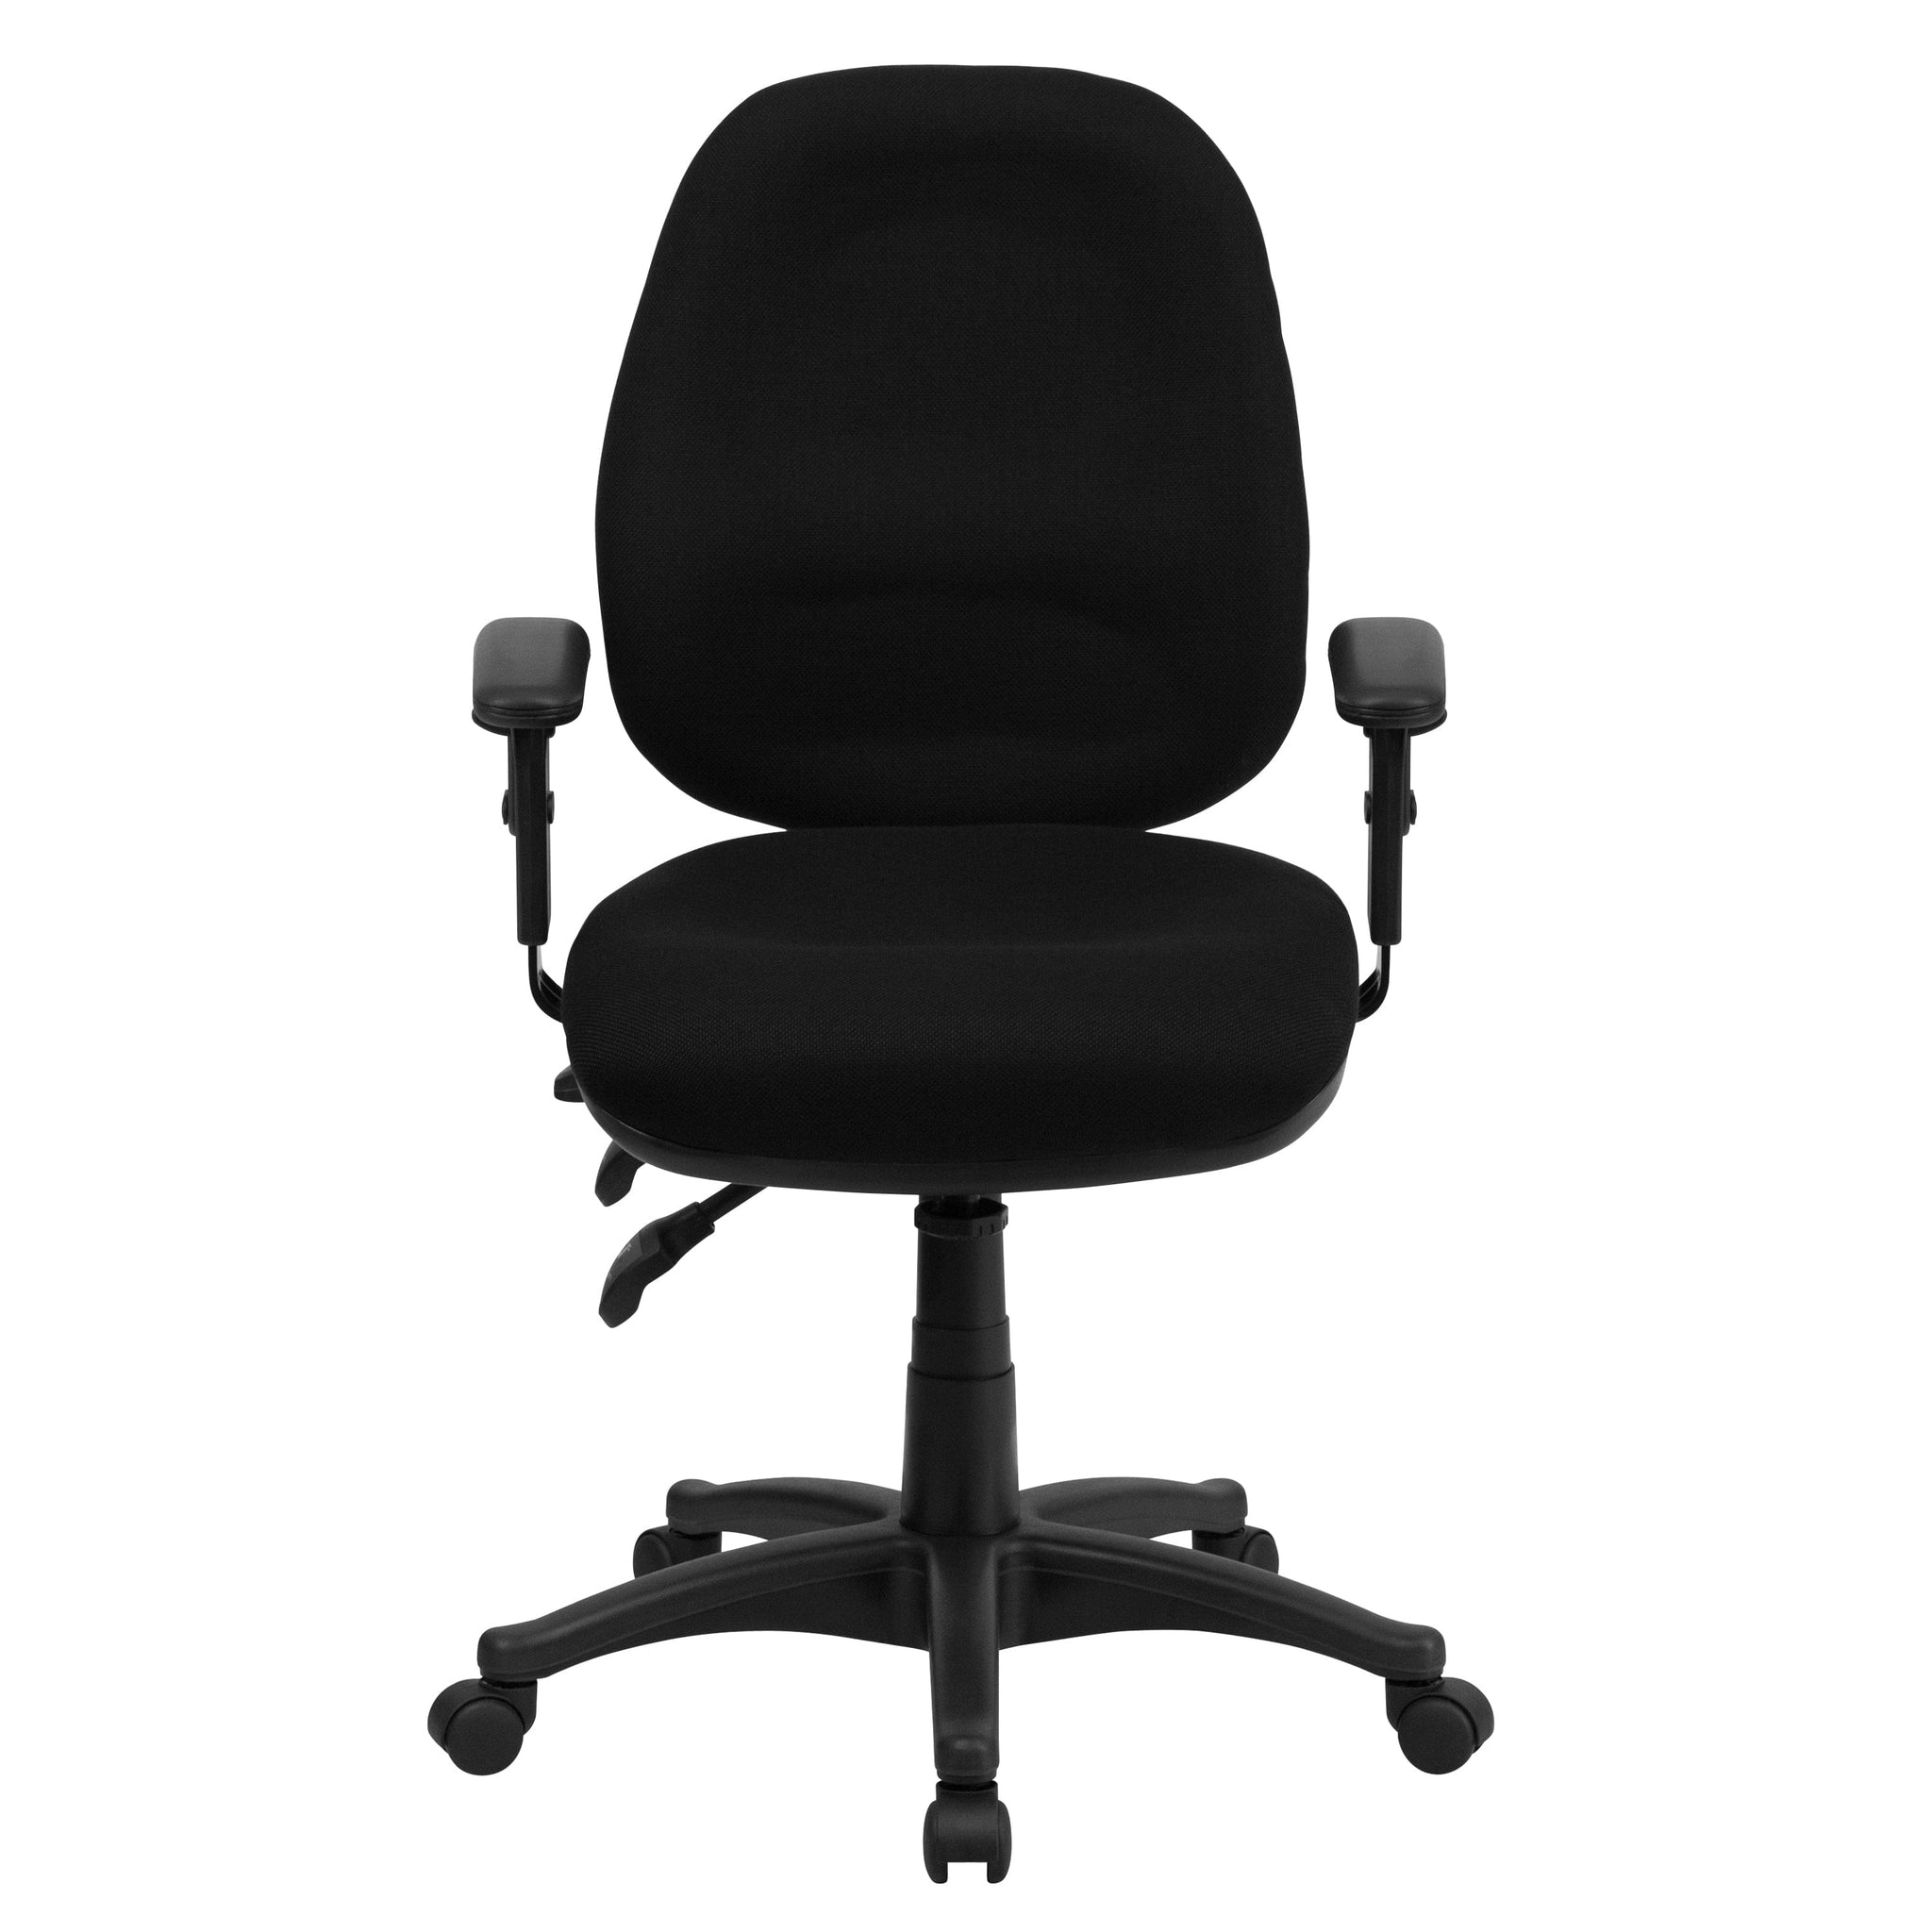 Mid-Back Black Fabric Multifunction Executive Swivel Ergonomic Office Chair with Adjustable Arms - BT-662-BK-GG